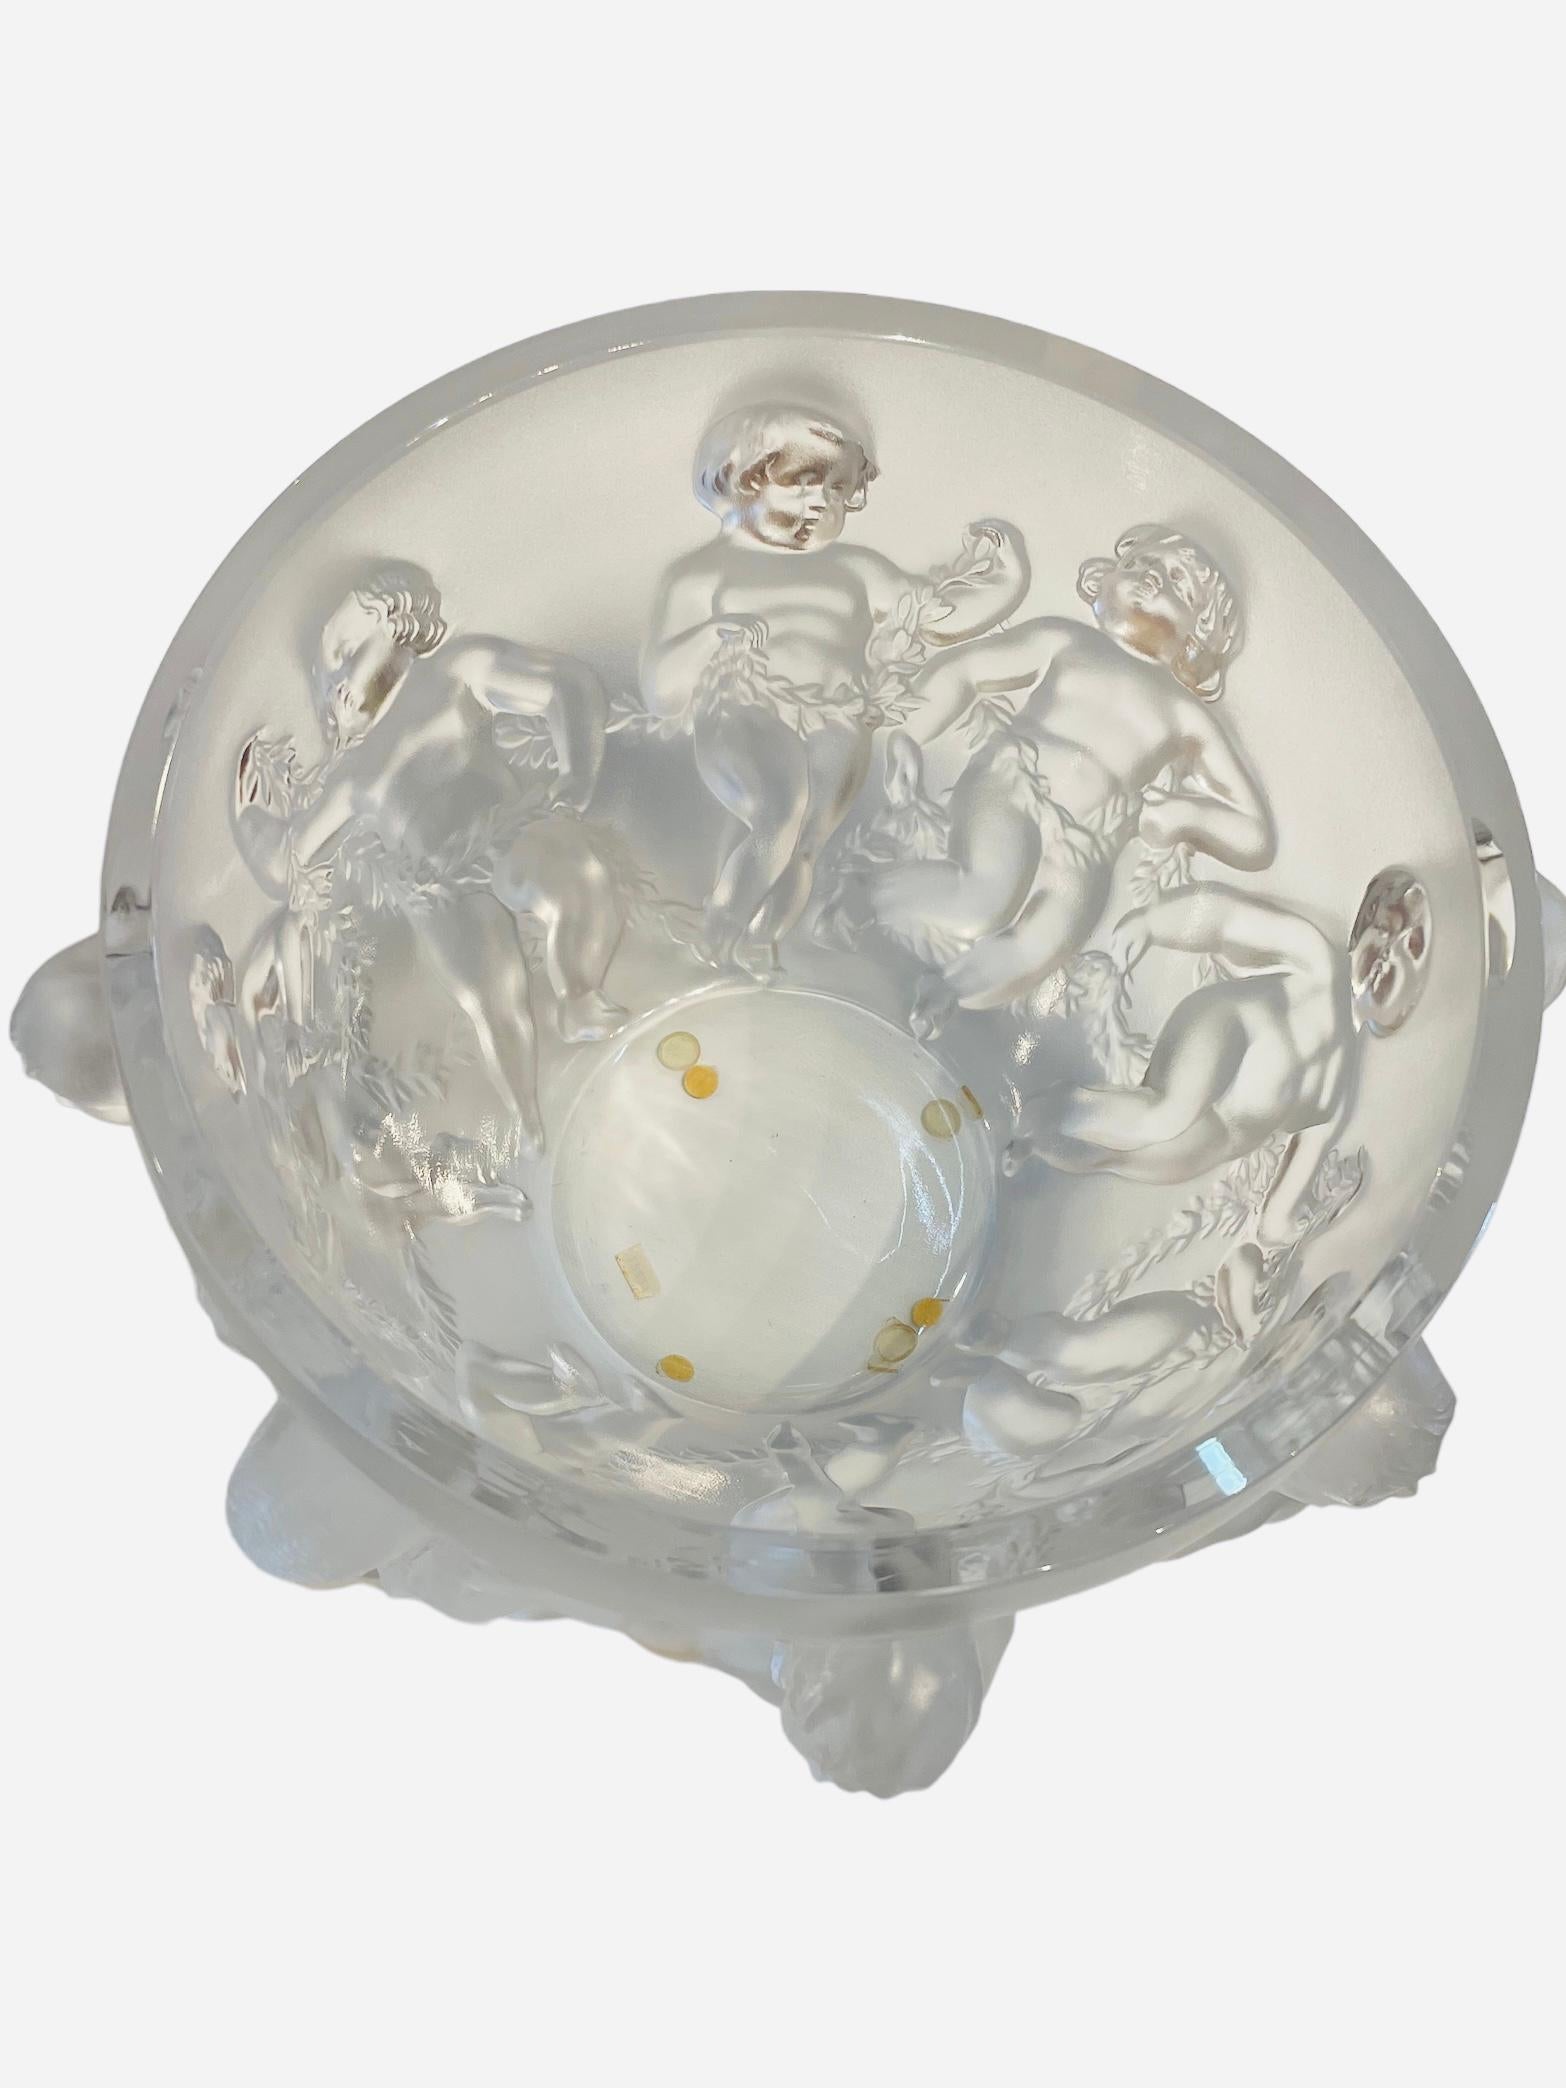 This is a Lalique frosted crystal “ Luxembourg “ large round bowl. It depicts a relief of playful cherubs that are joined together by holding a garland of laurel leaves. Below the base, It is etched Lalique encircled R,France.